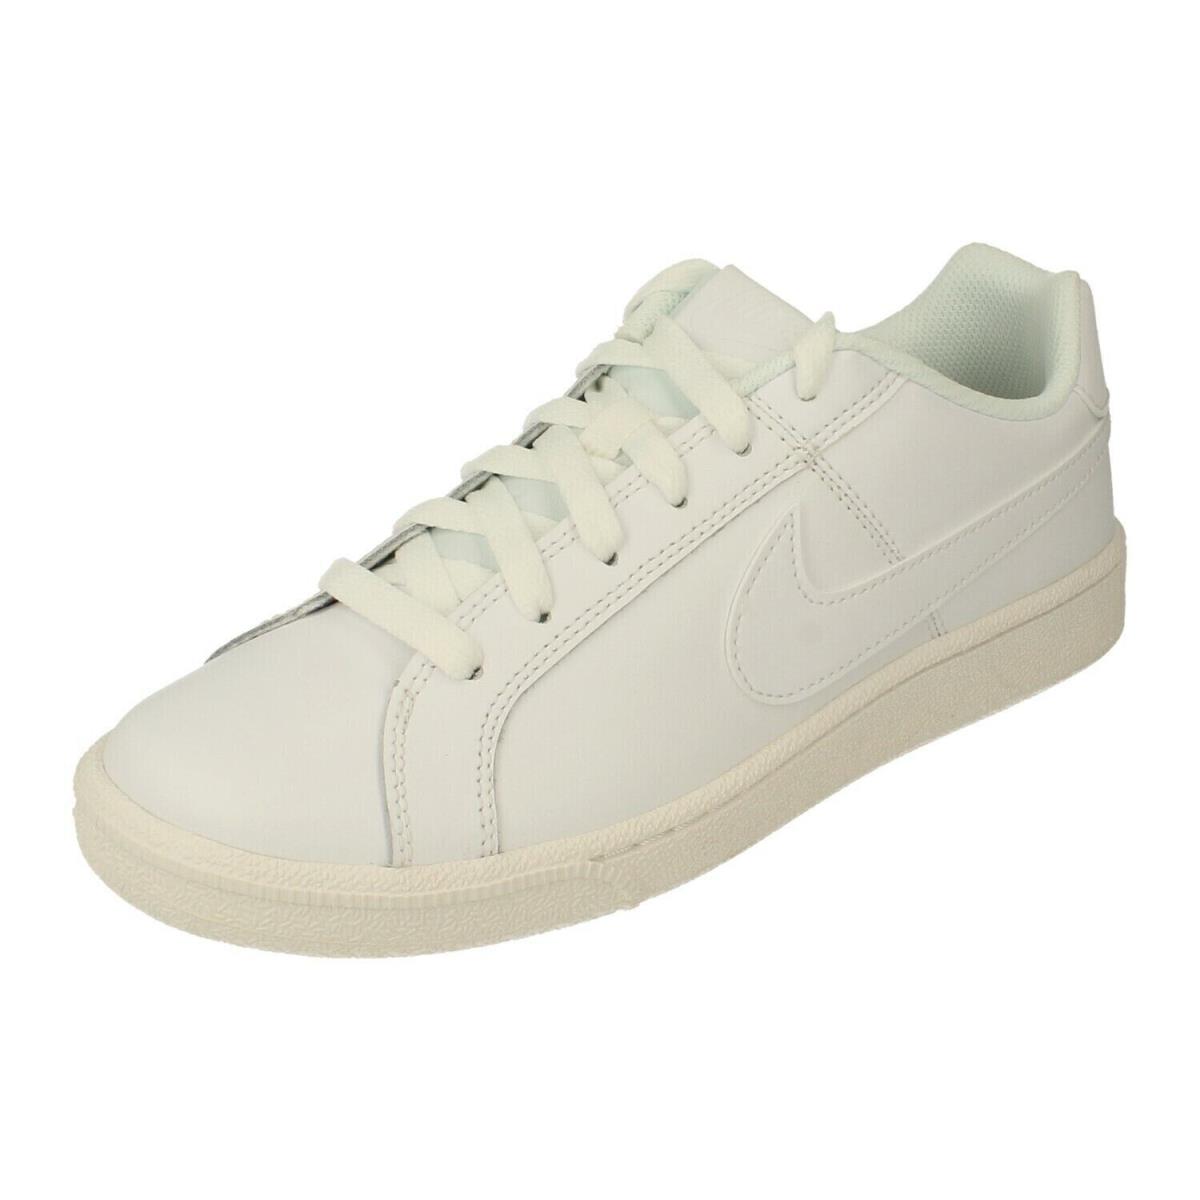 Nike Womens Court Royale Size 7.5 Trainers 749867- 105 Sneakers Shoes White